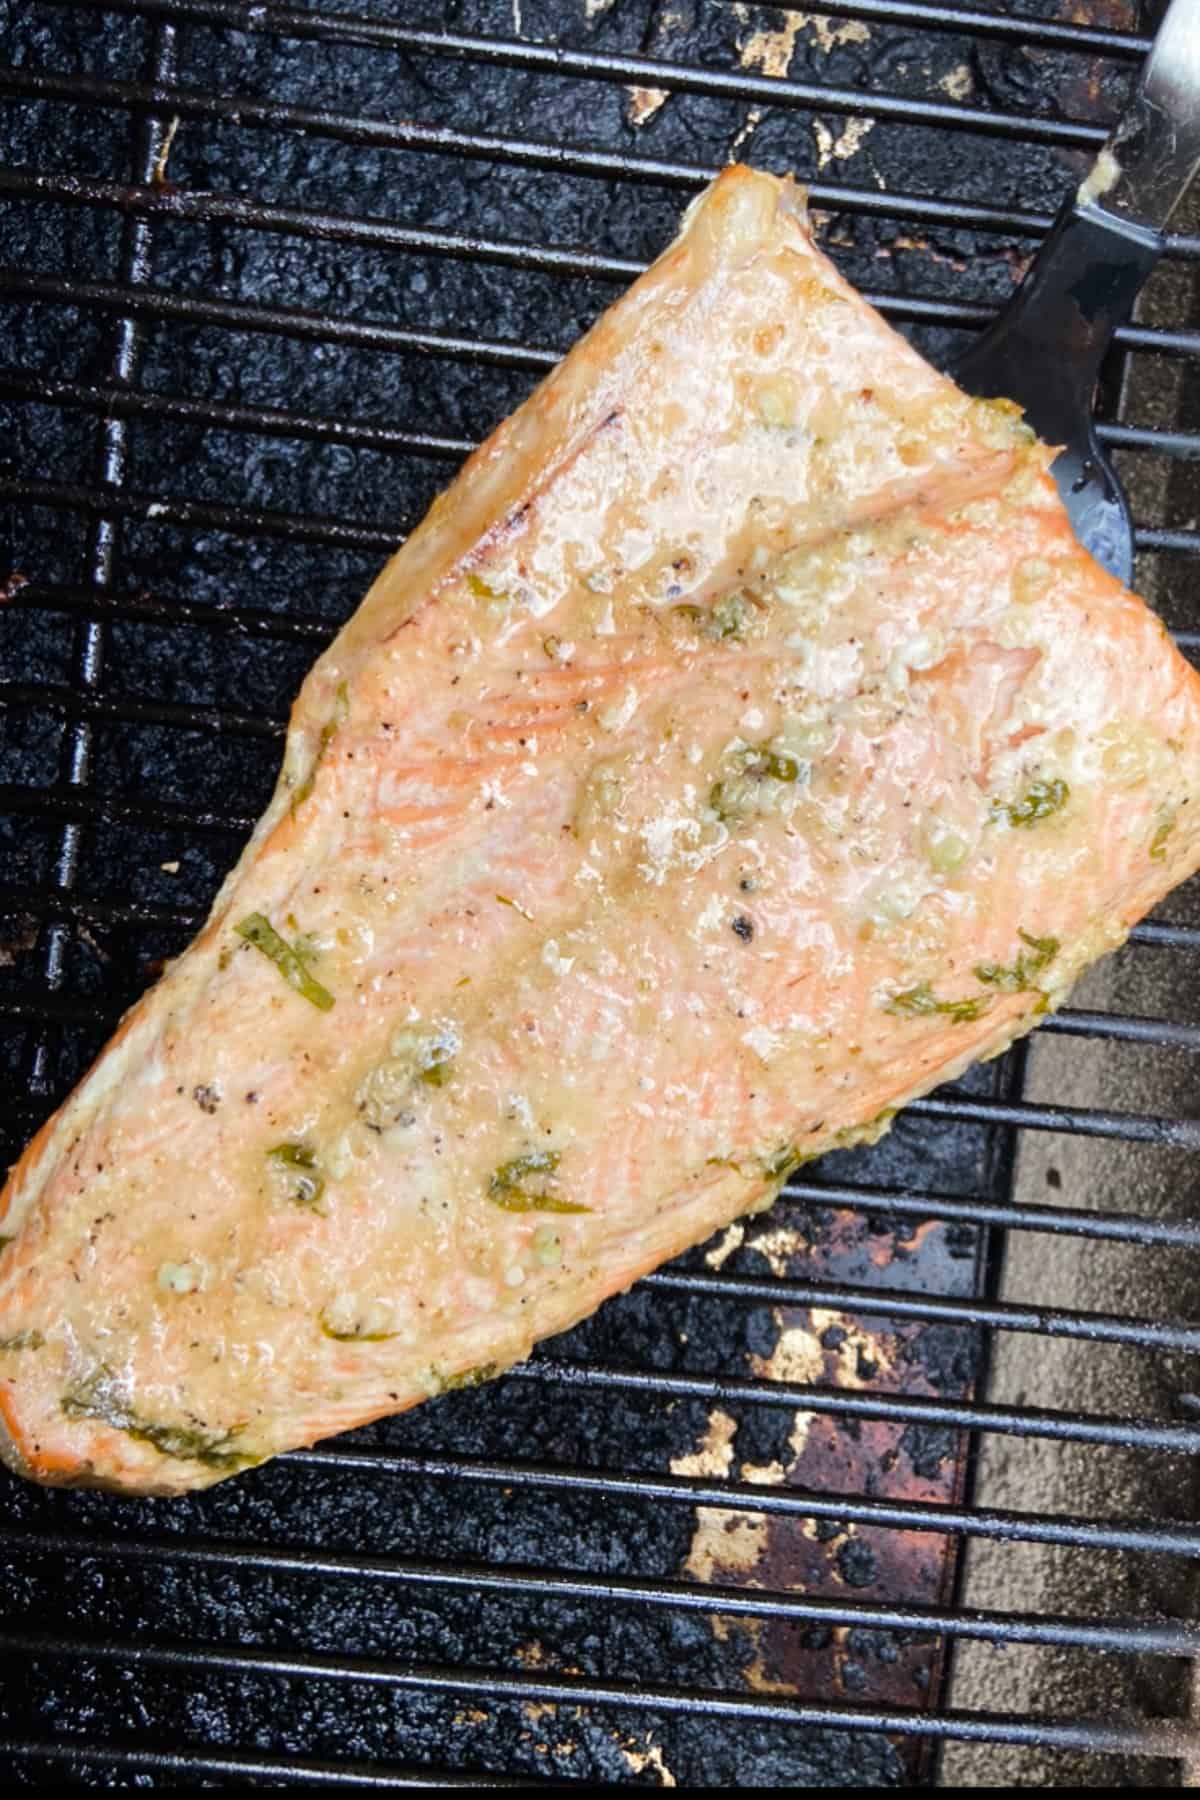 Top down close up of a large fillet of grilled fish on the grill.